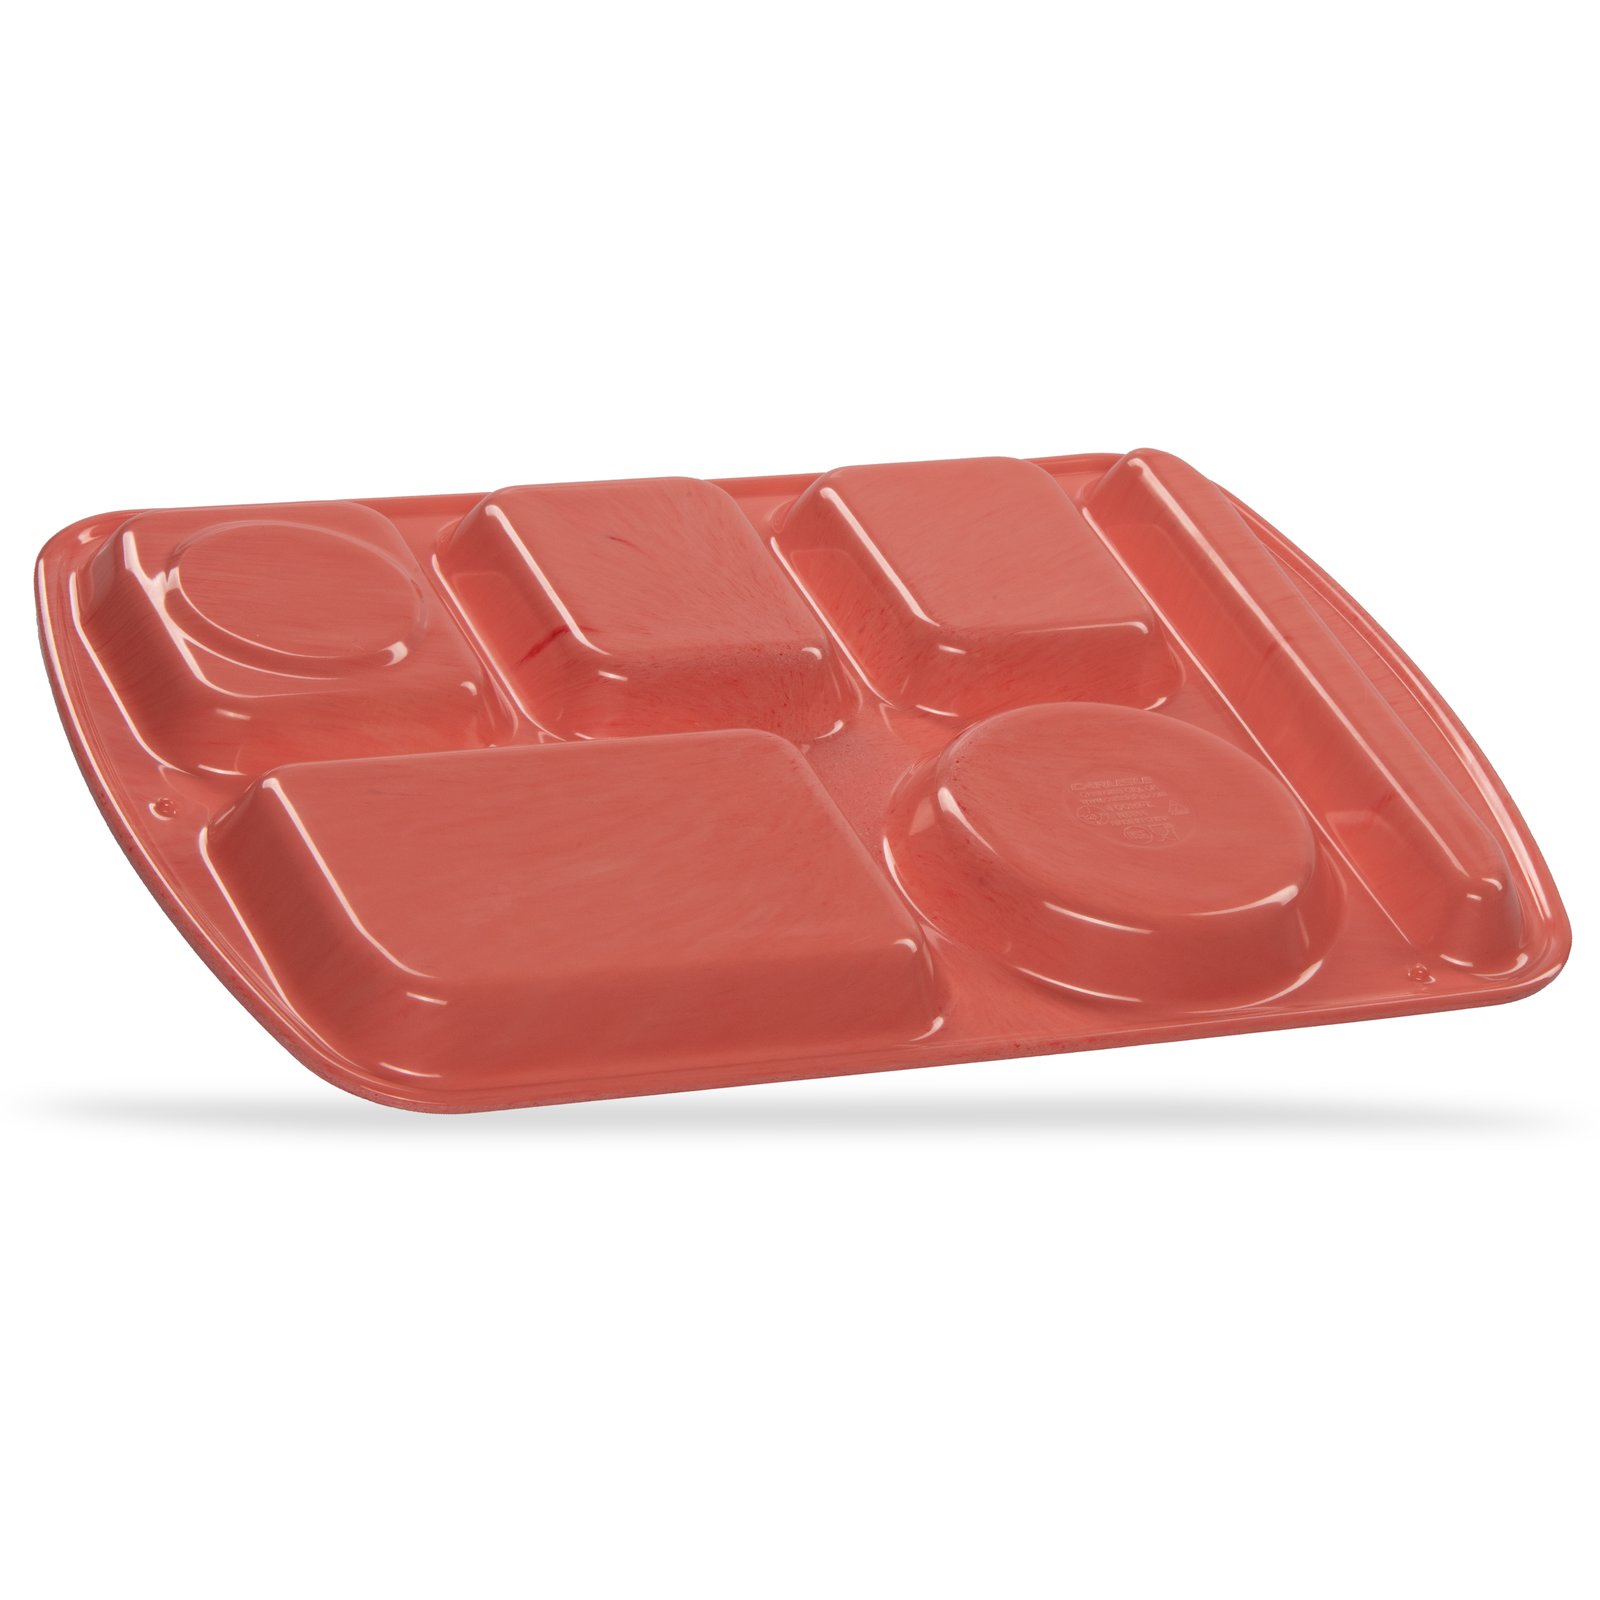 586500 - Left-Hand Economy 6-Compartment Melamine Tray 10 x 14 -  Variegated